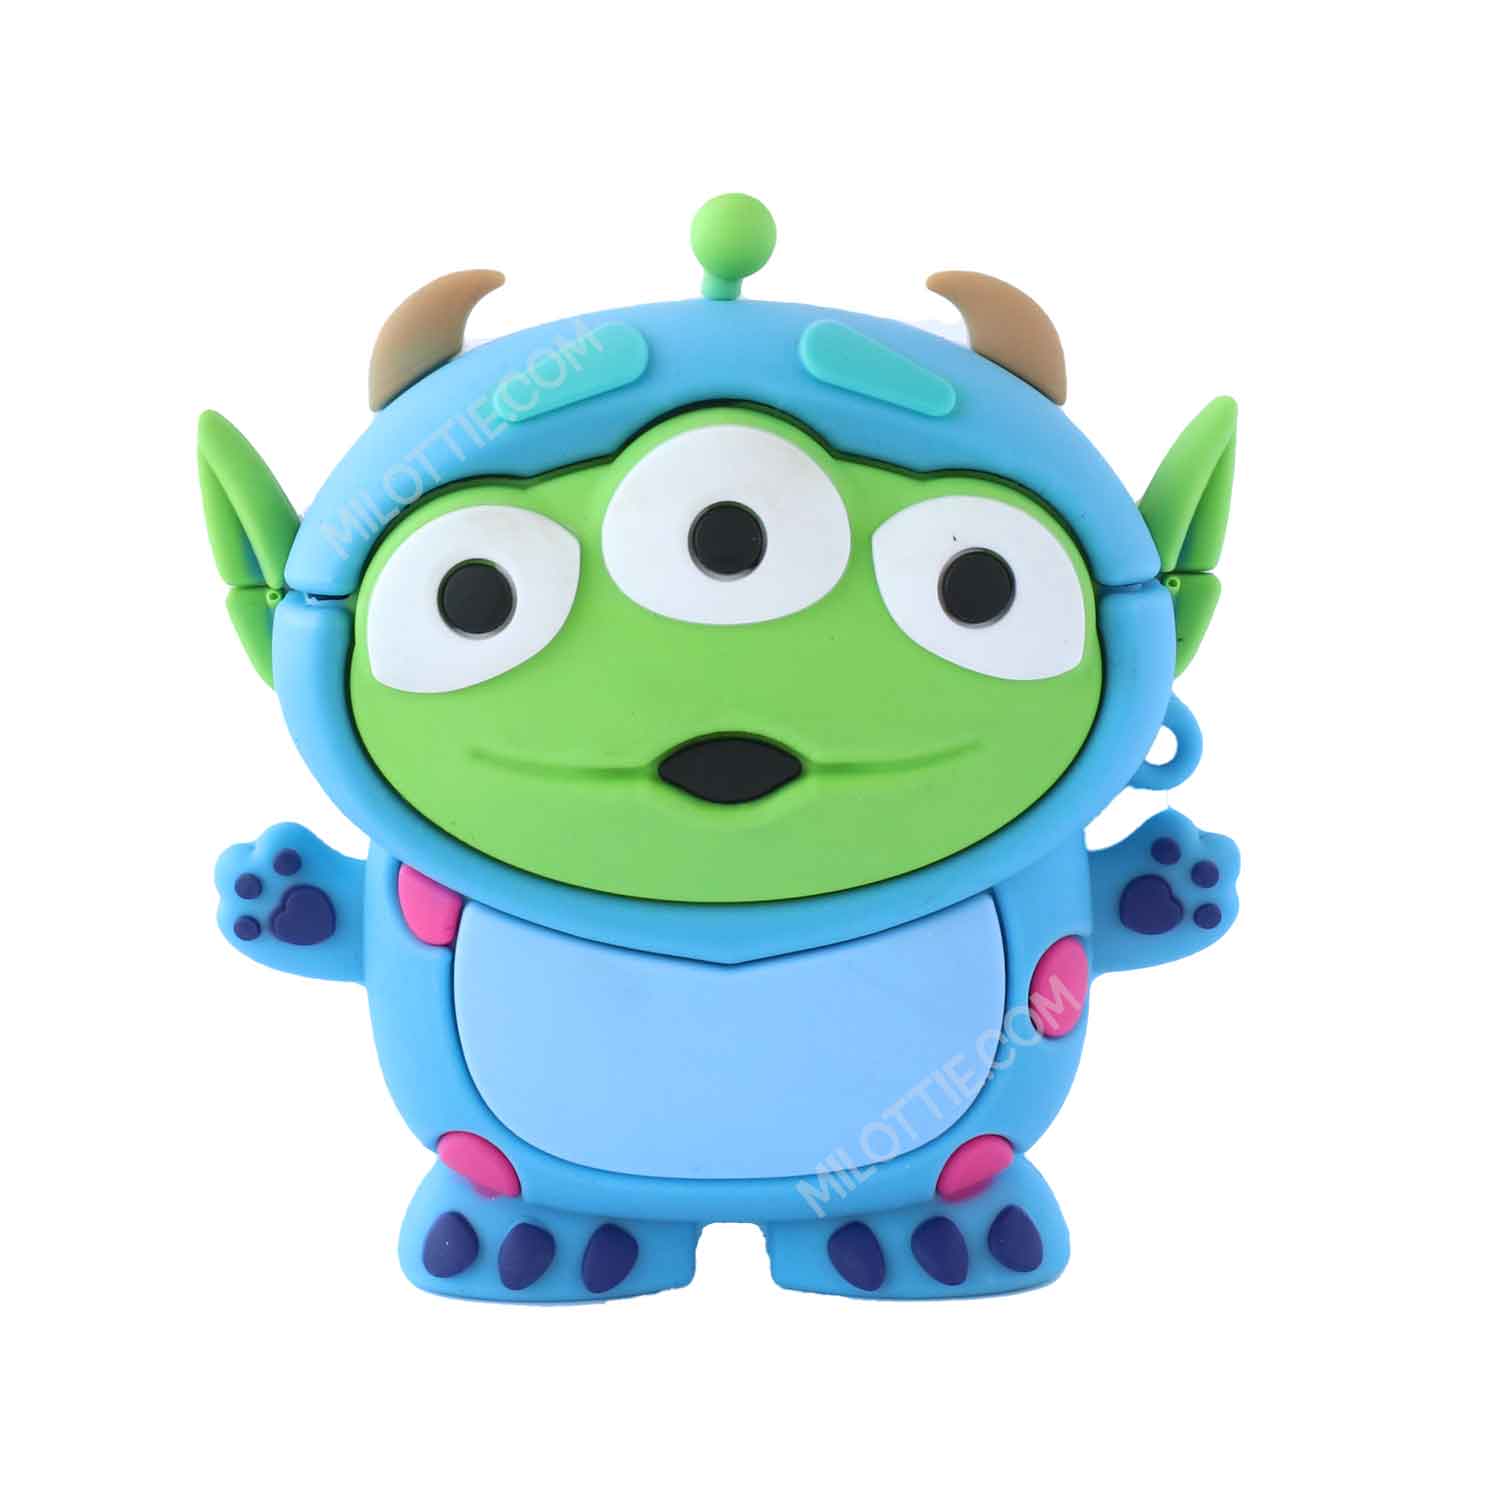 Toy Story Alien in Sulley Monster Costume Airpods Case